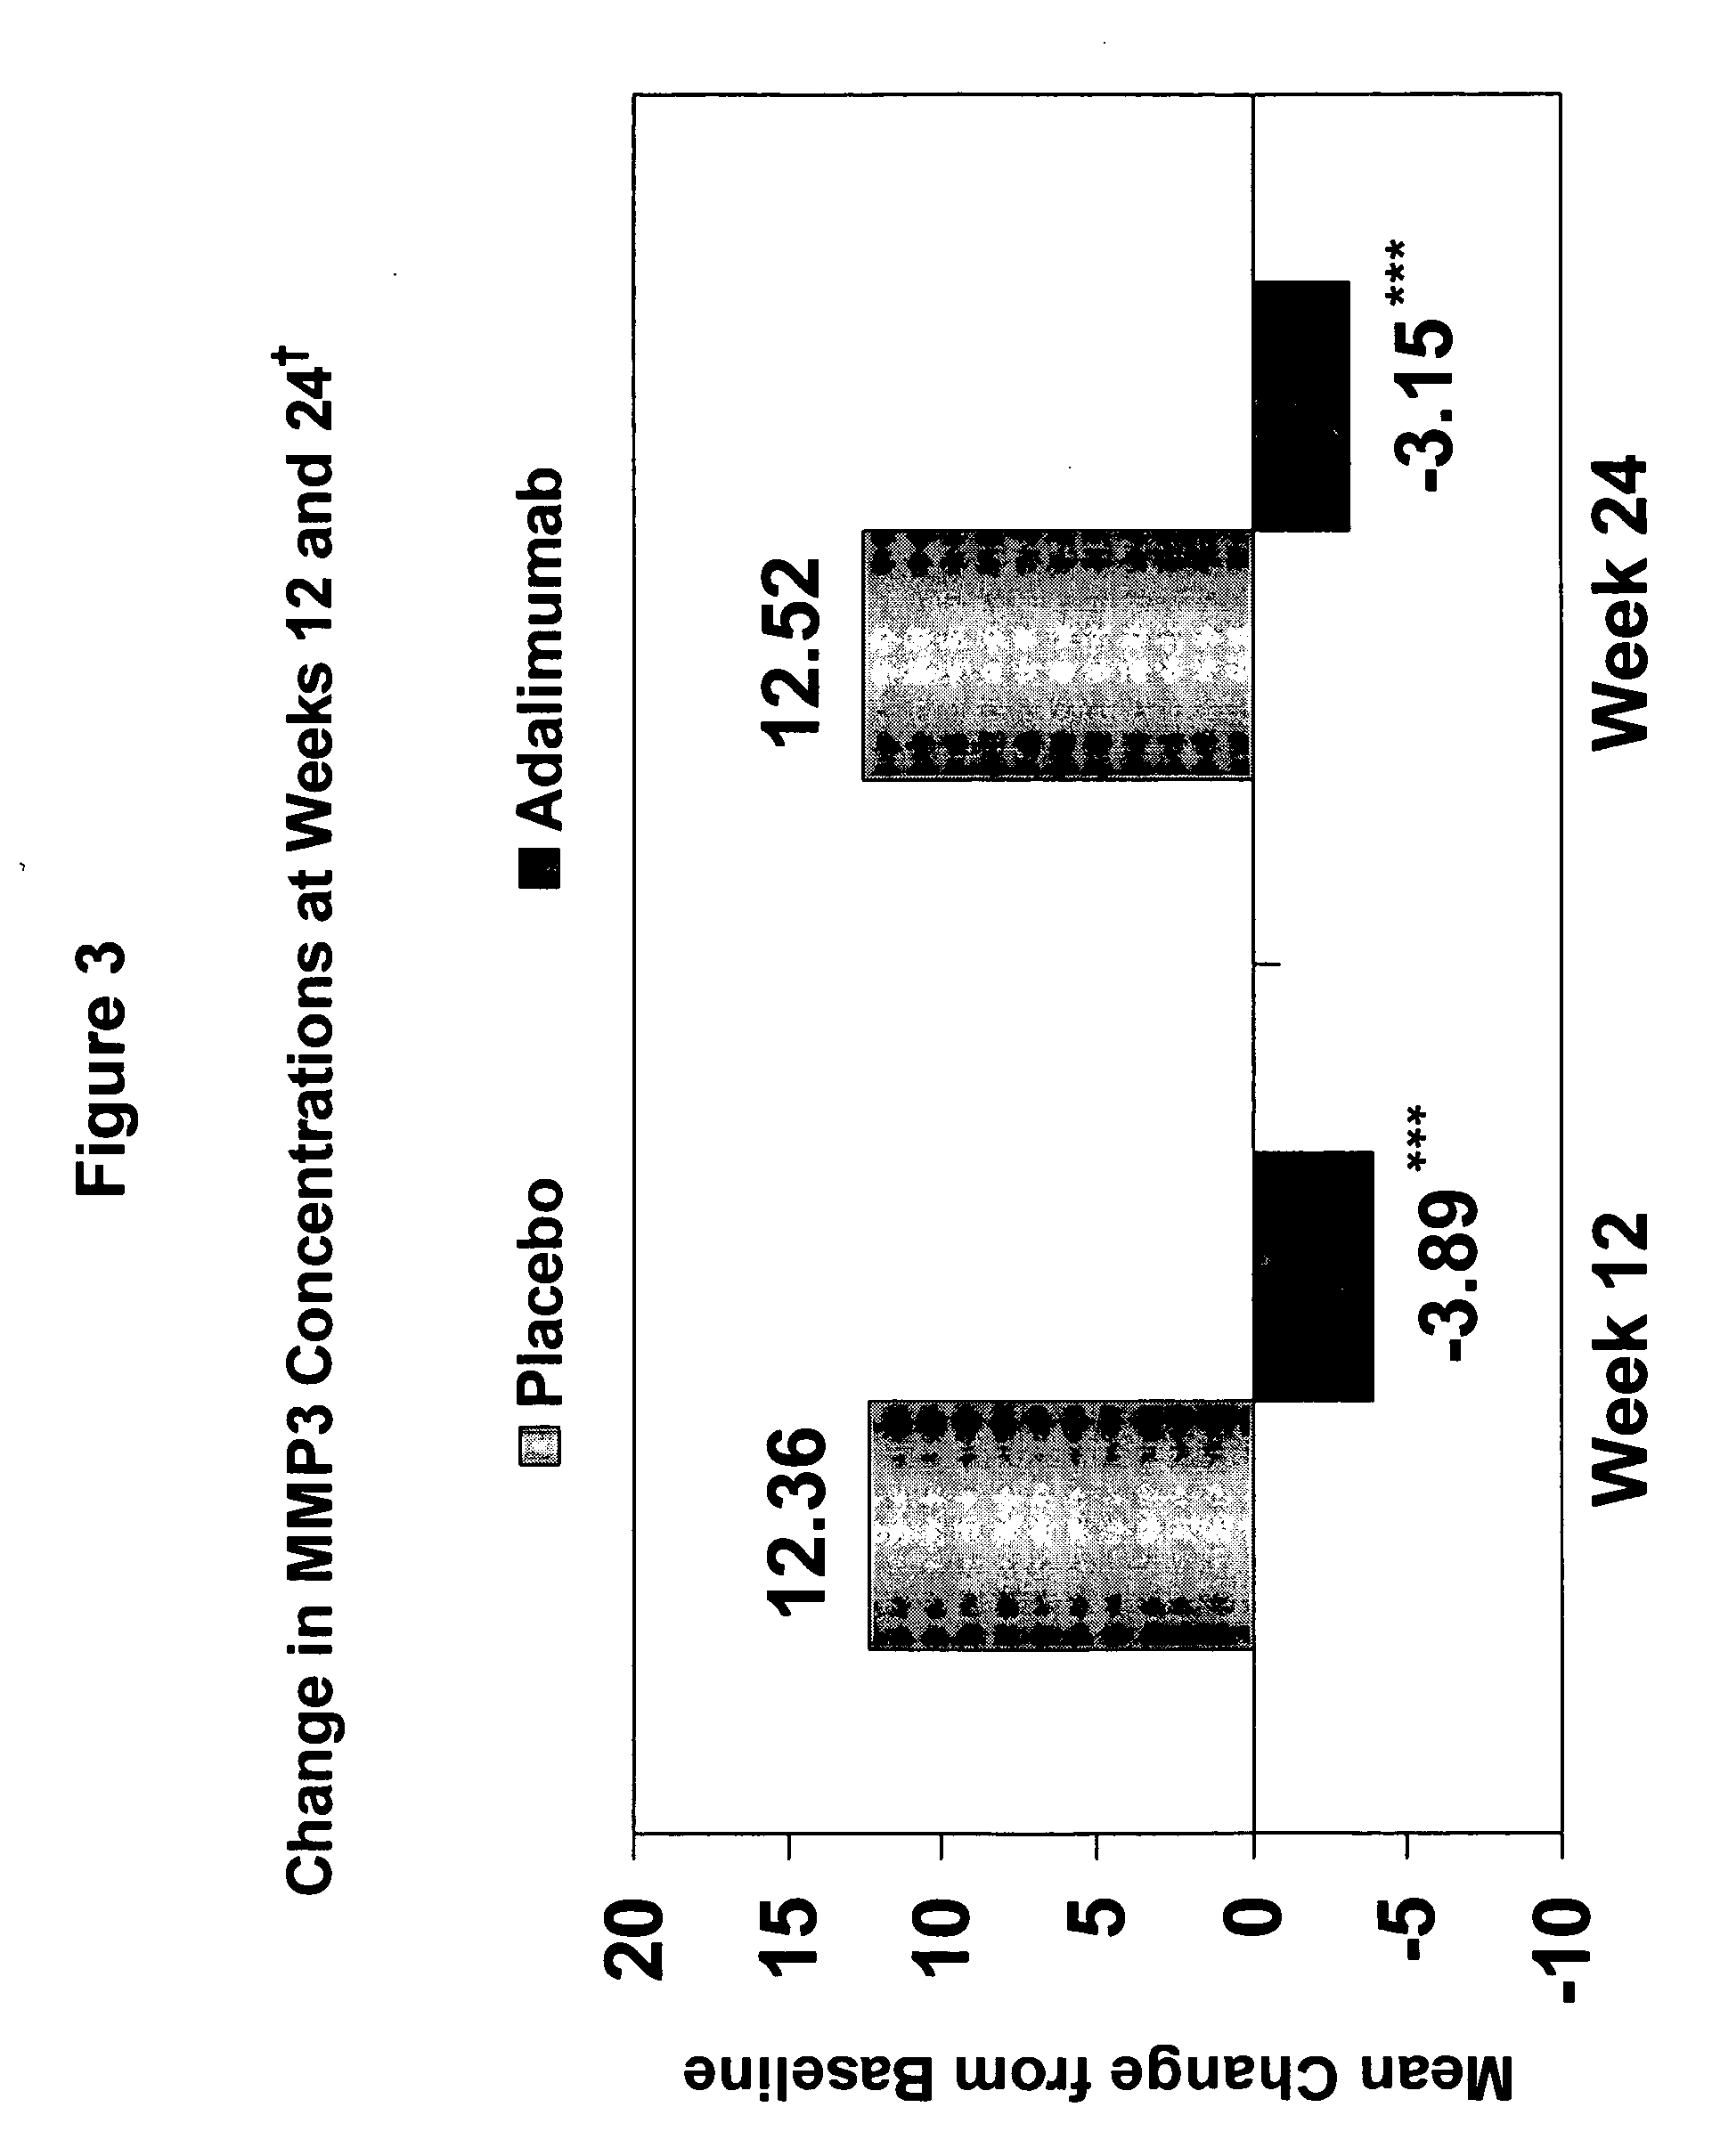 Methods and compositions for diagnosing ankylosing spondylitis using biomarkers